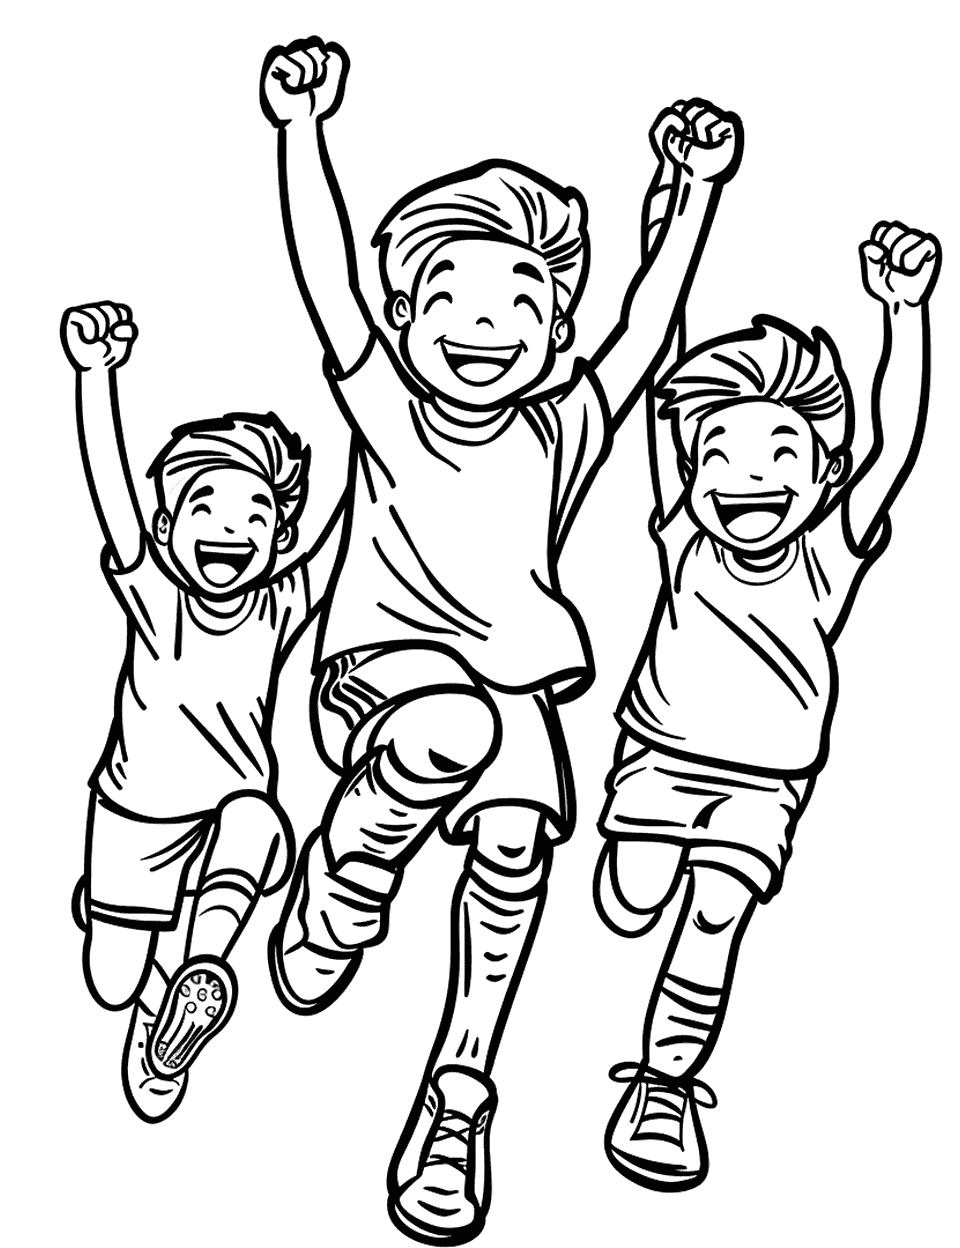 Goal Celebration with Teammates Soccer Coloring Page - A player celebrating a goal with teammates, jumping and pumping fists in the air.